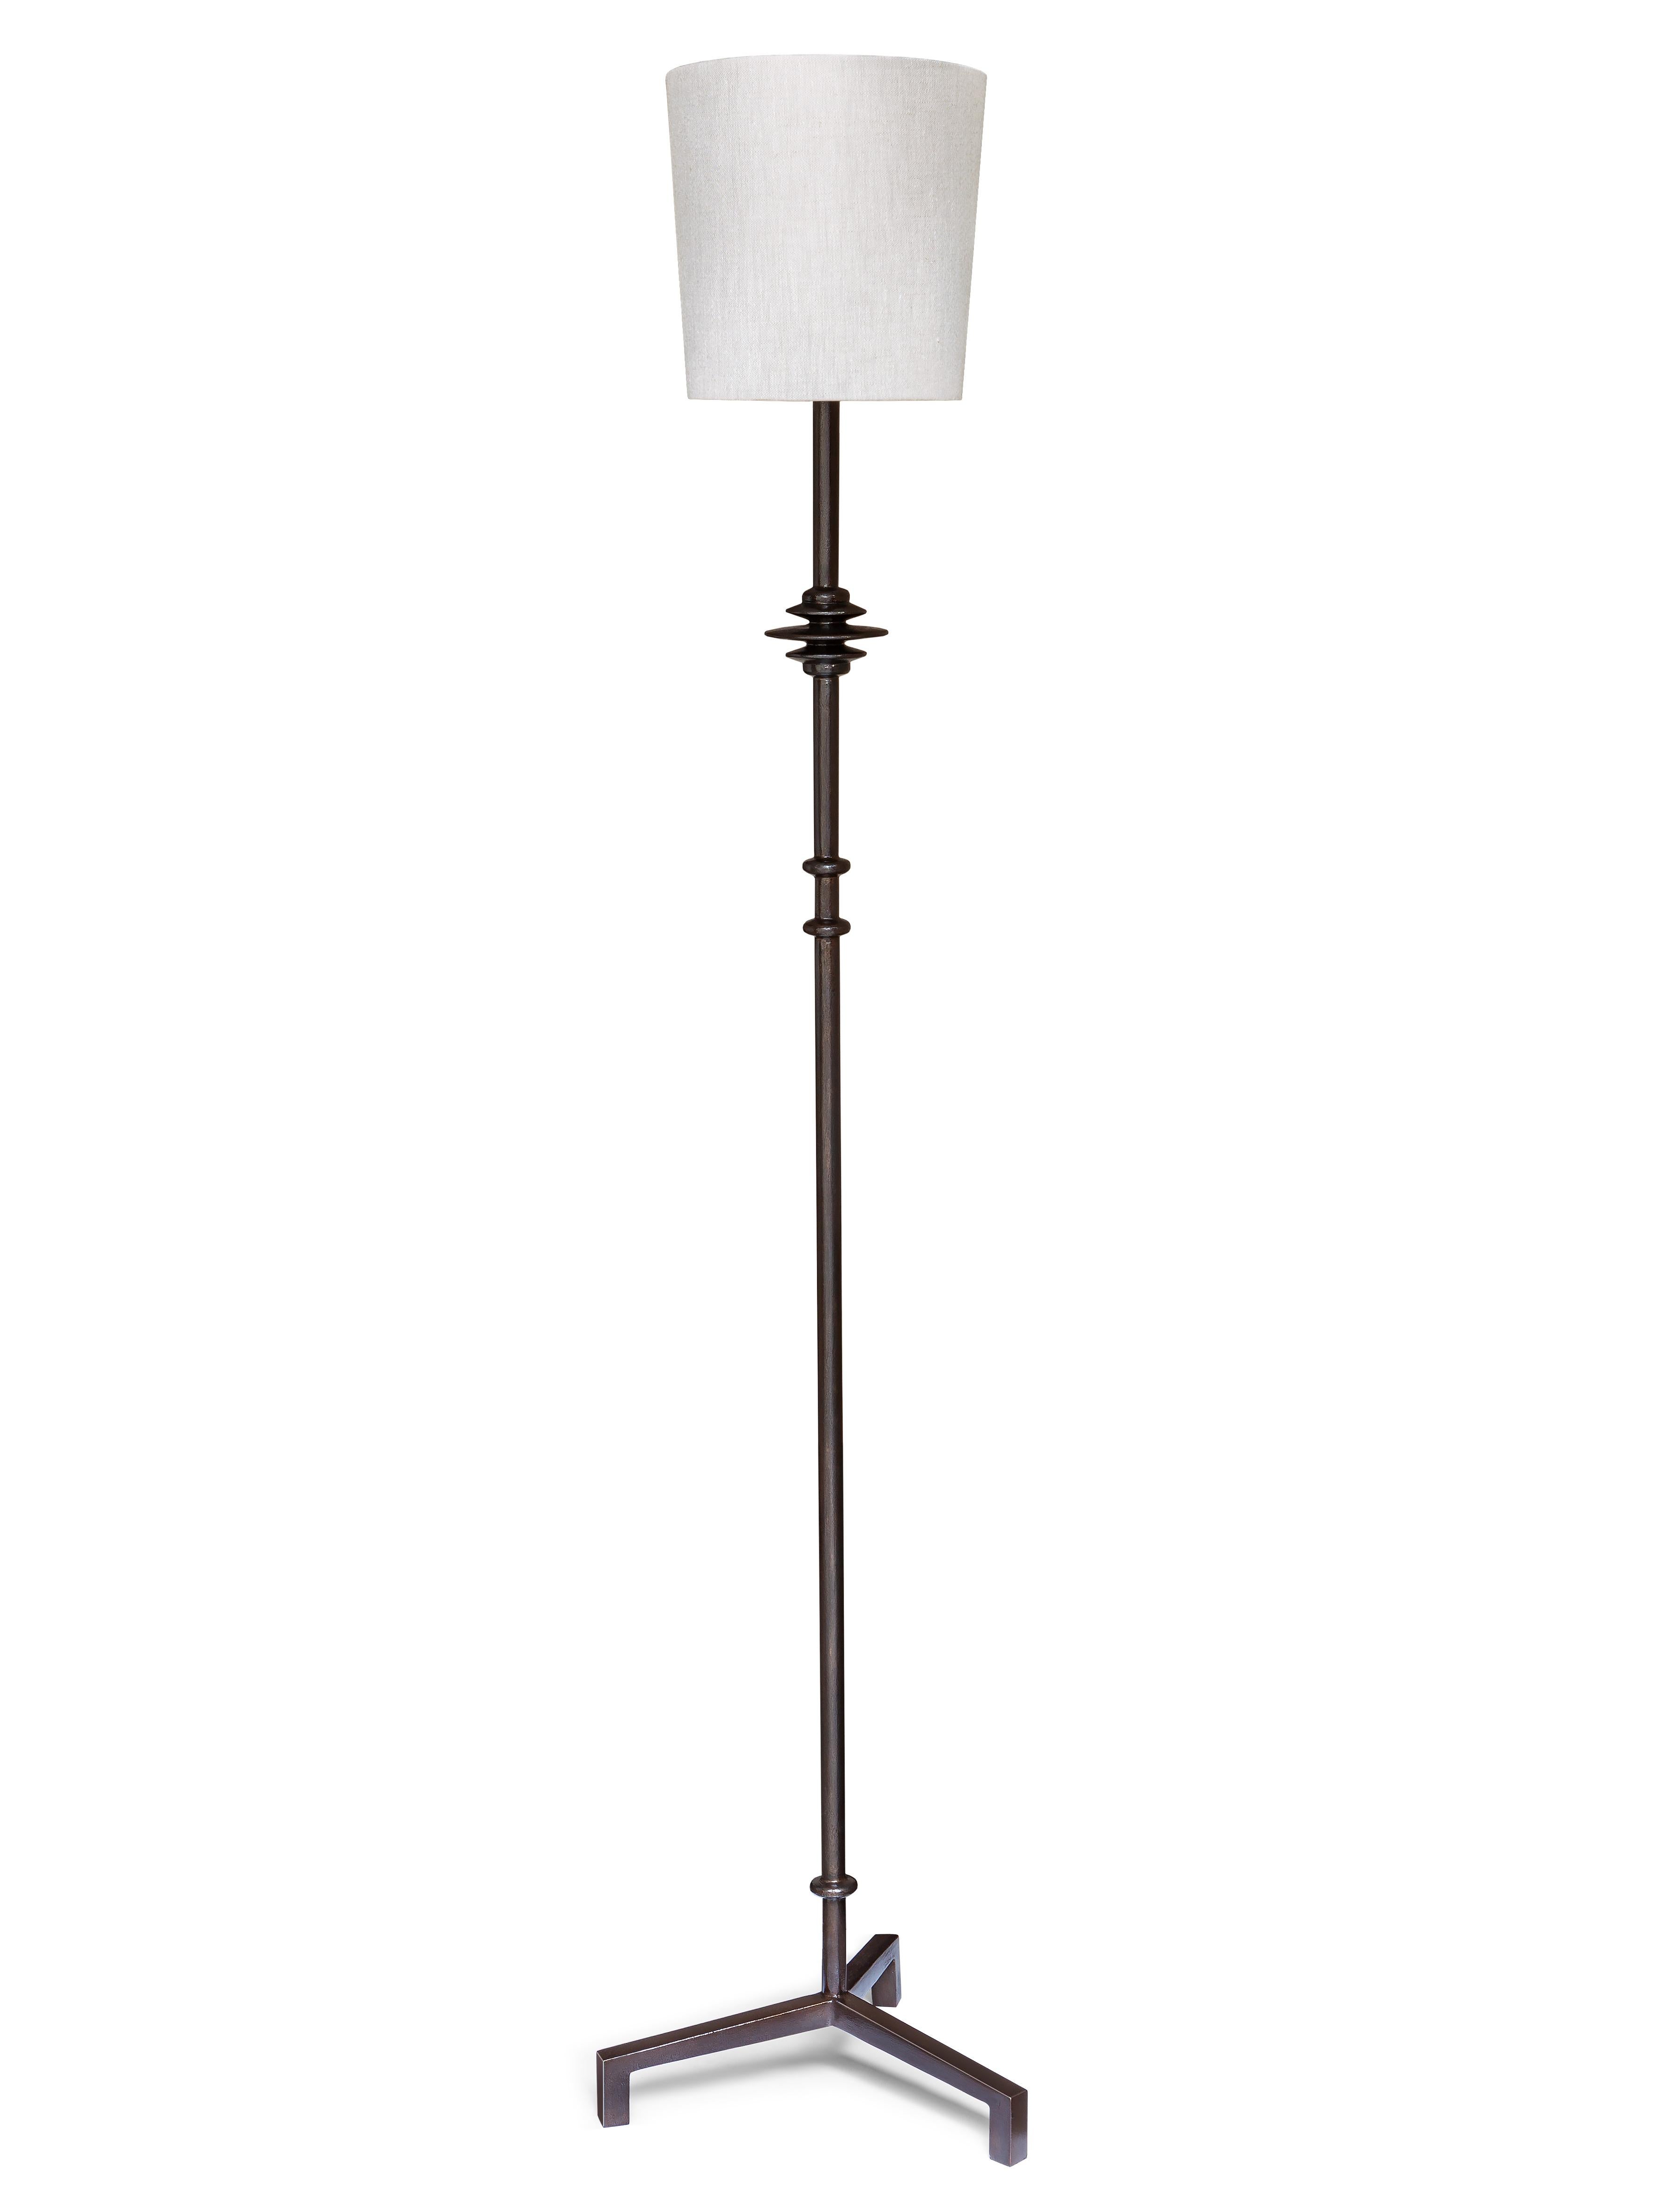 Floor lamp in hand sculpted plaster on metal armature, in the Giacometti Manner.

Silk Satin  or Linen Lampshade included according to your wish.
Lampshade dimensions: Ø 20 top x Ø 23 bottom x H 23 cm / Ø 7,87″ top x Ø 9″ bottom x H 9″

LAMP 1 x